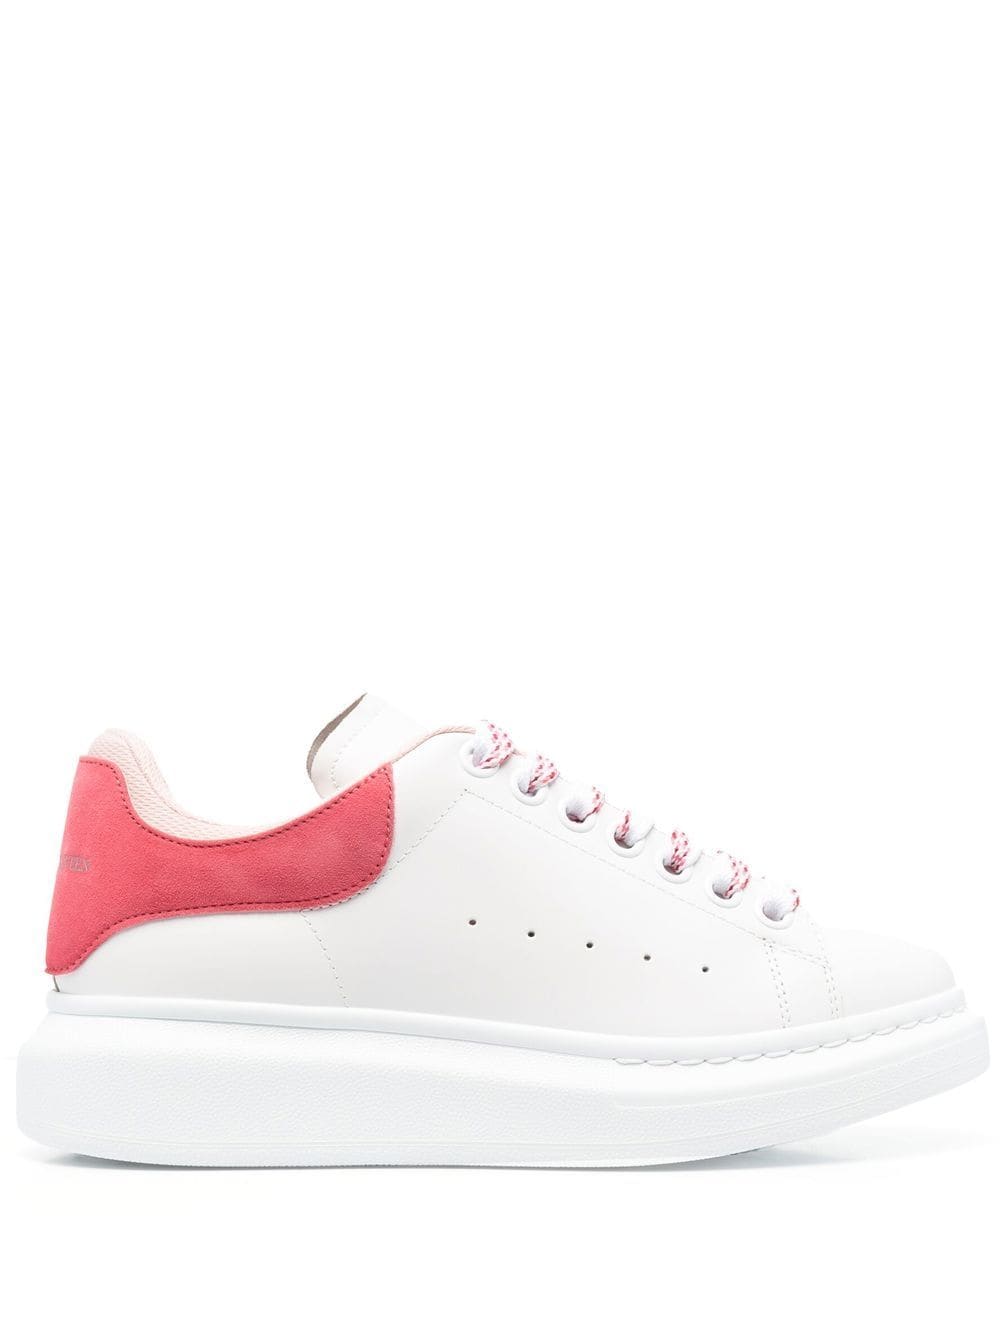 White/light red leather/suede oversized low-top sneakers